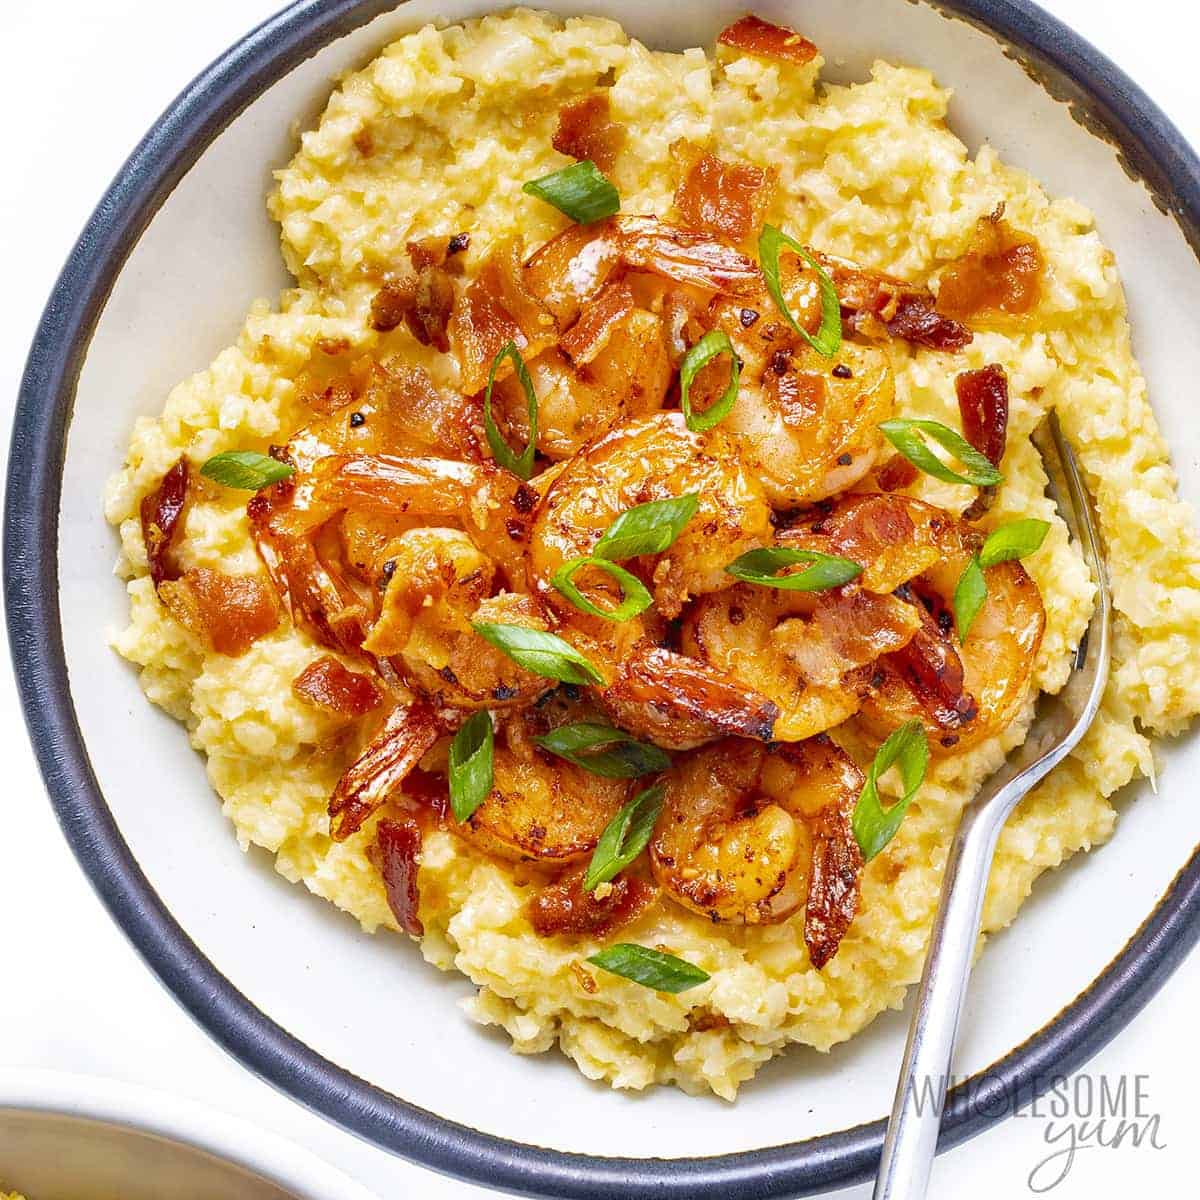 Shrimp and cauliflower grits recipe in a bowl with a fork